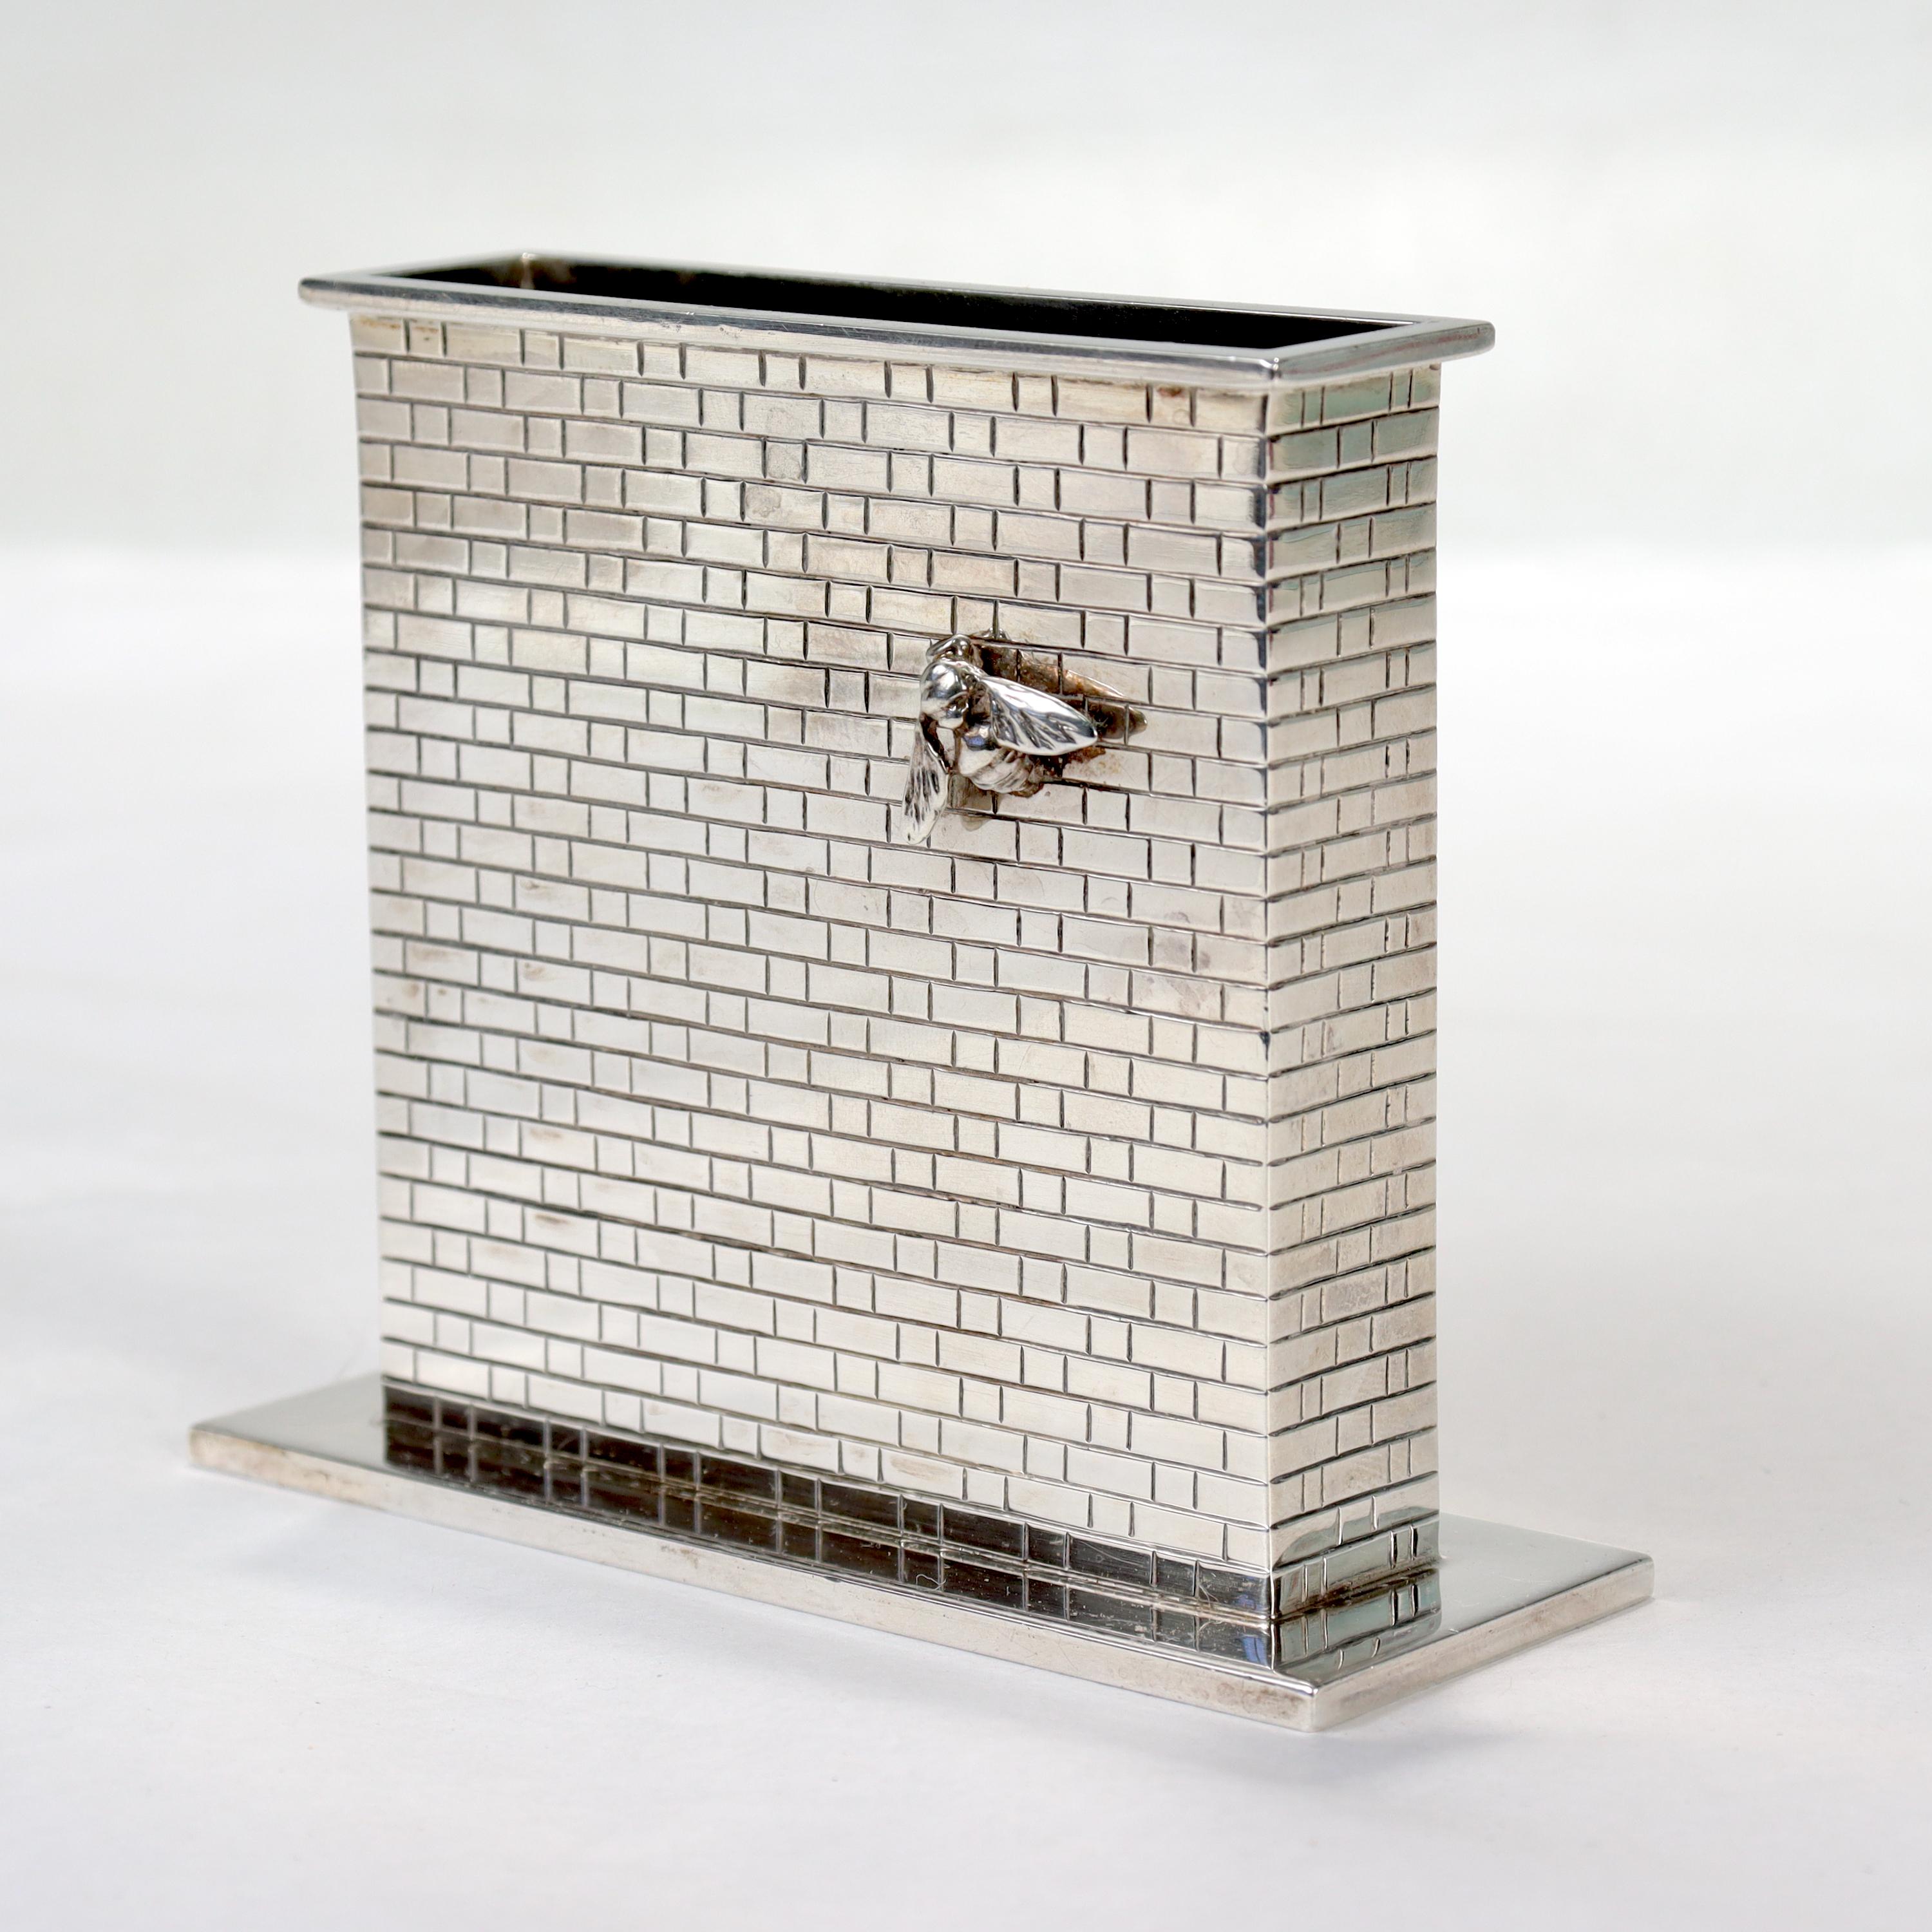 A fine, unique hand made vase or vessel 

By Sarah Jones.

In sterling silver. 

Exhibited in the Exhibition entitled: Sayings in Silver

In the form of a brick wall with an applied figural wasp or bee to both sides.

Sarah Wall Jones was one of